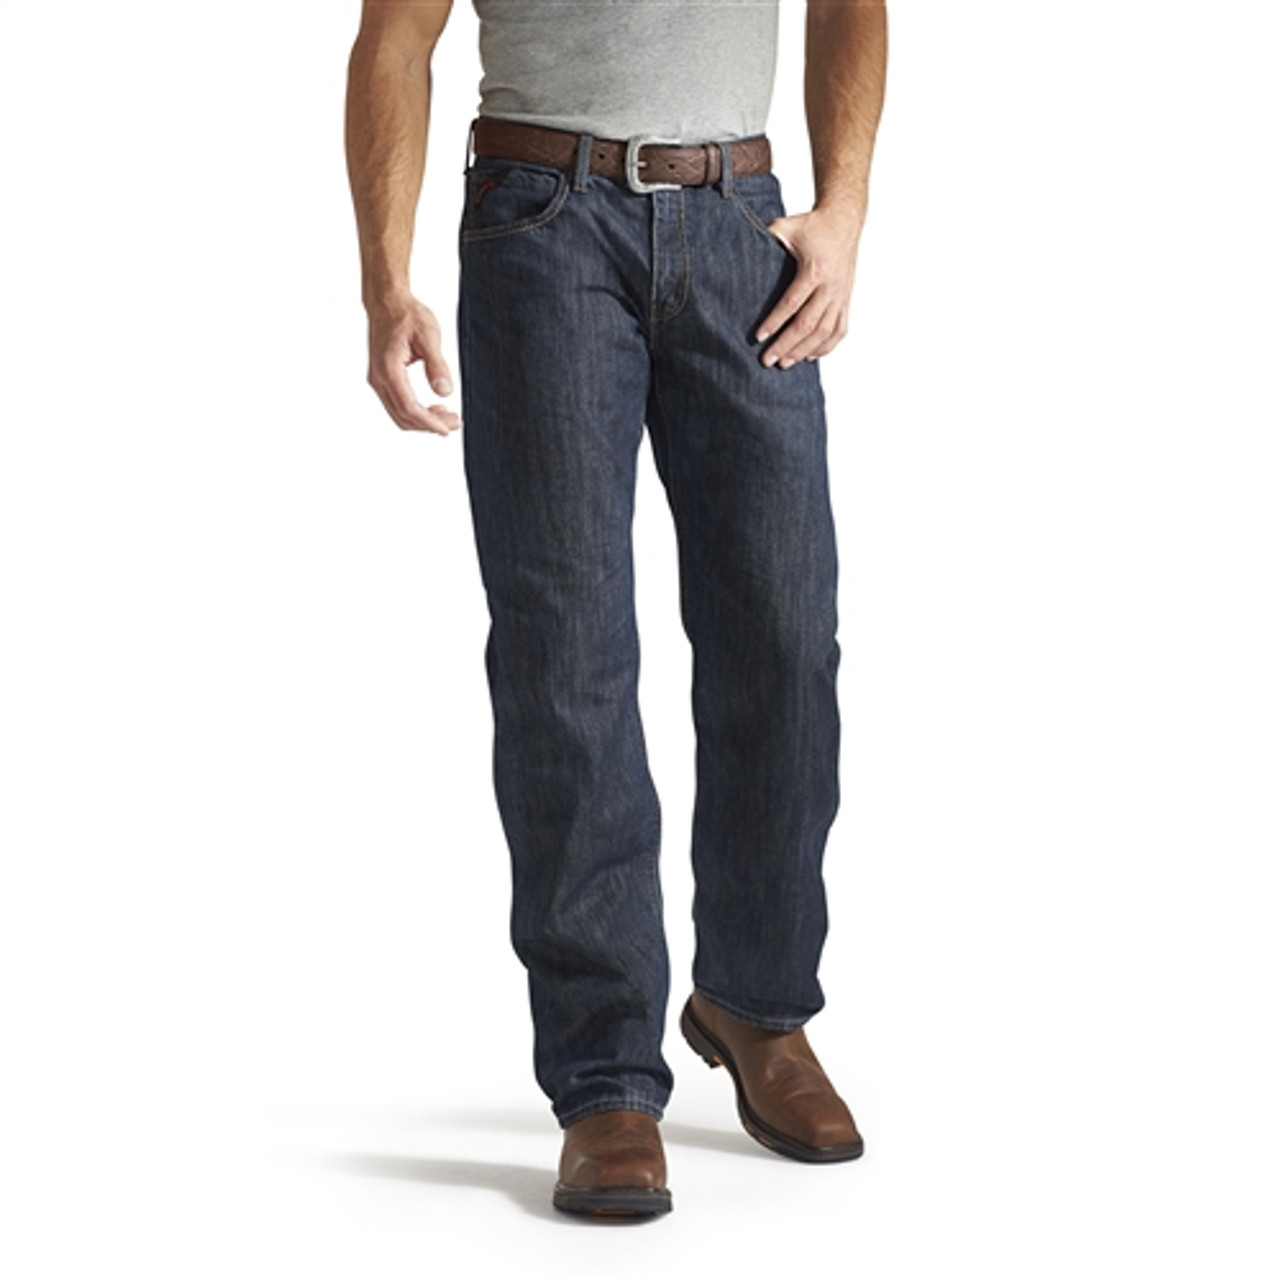 Men's Loose fit Jeans, New Collection